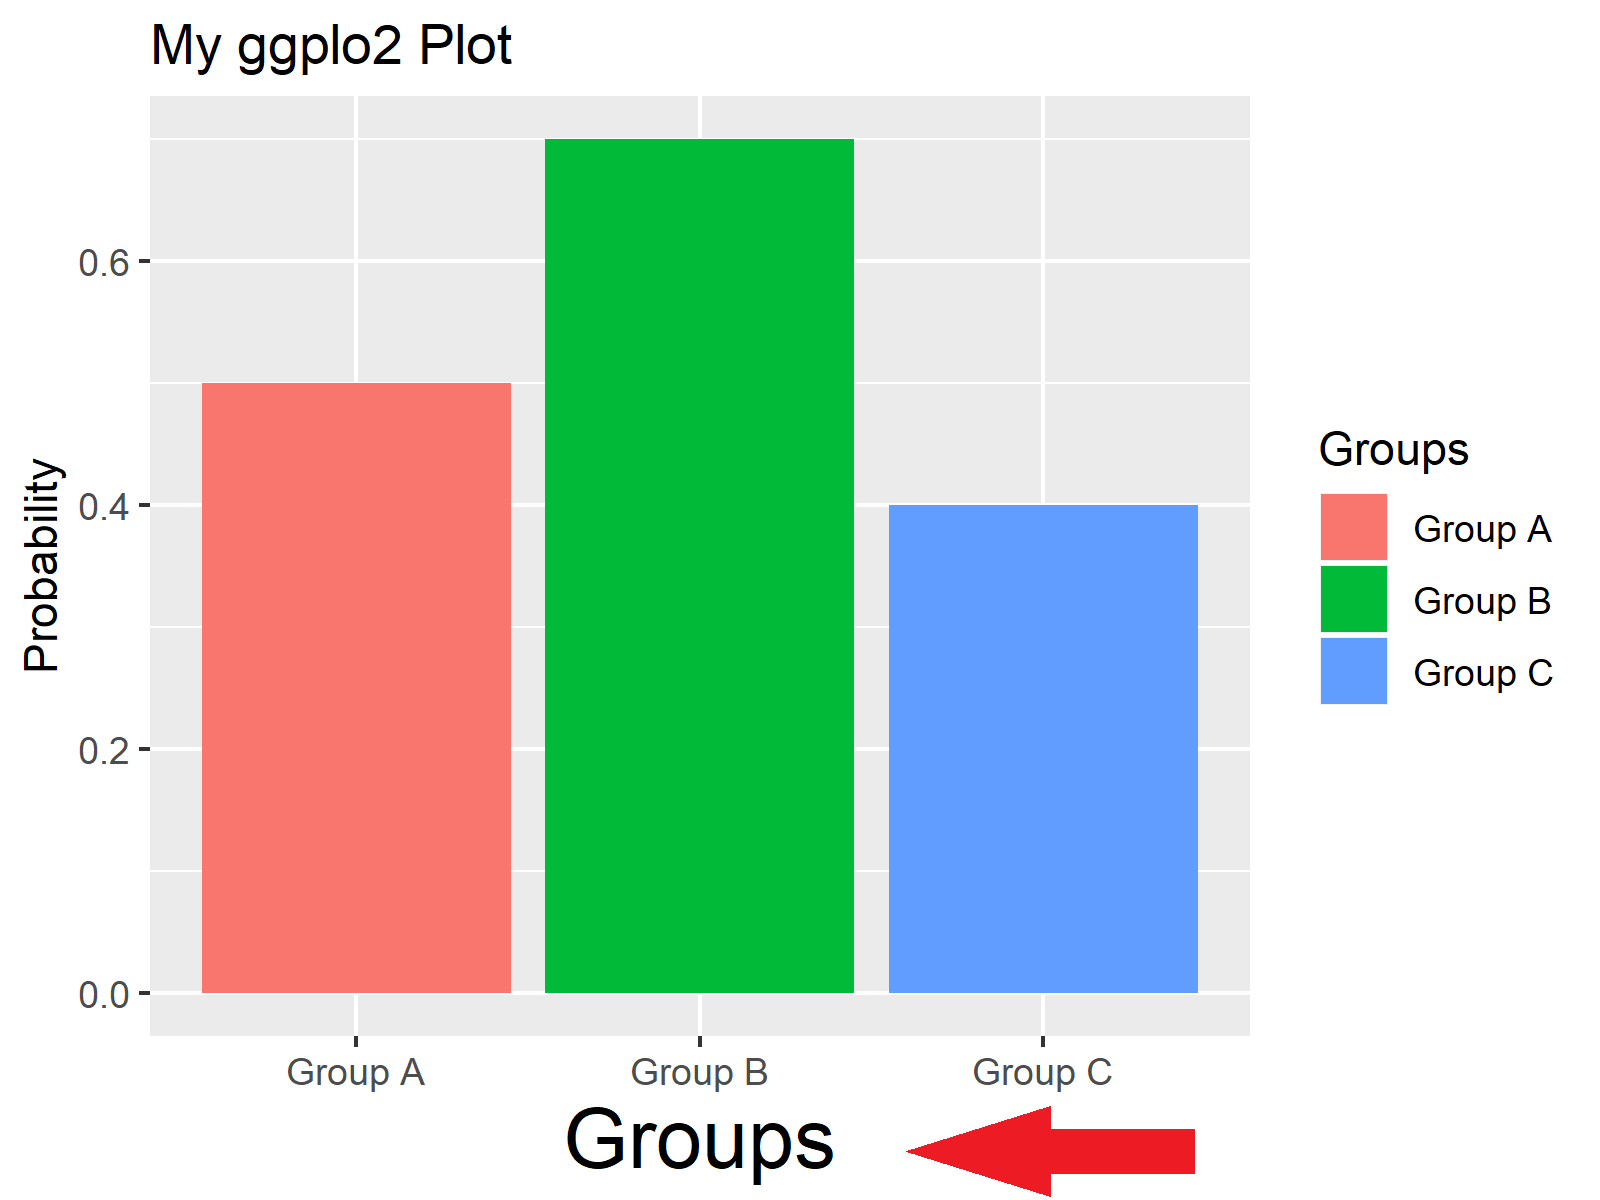 r ggplot2 plot font size of x axis title